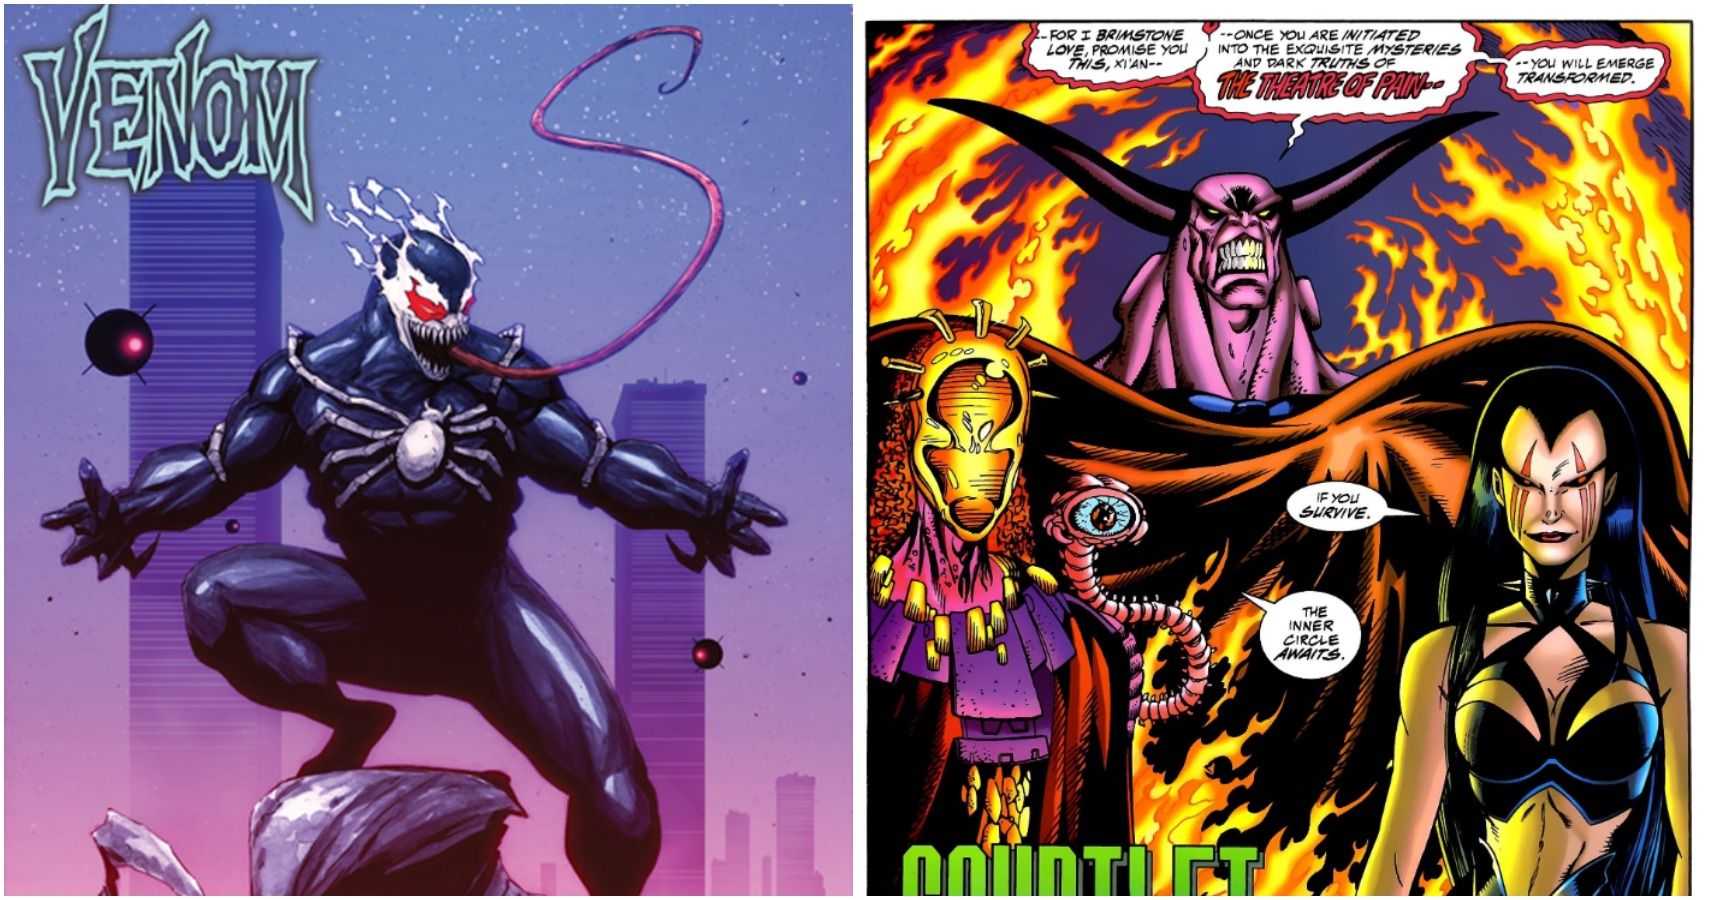 Who is the bad guy in Spider-Man 2099?